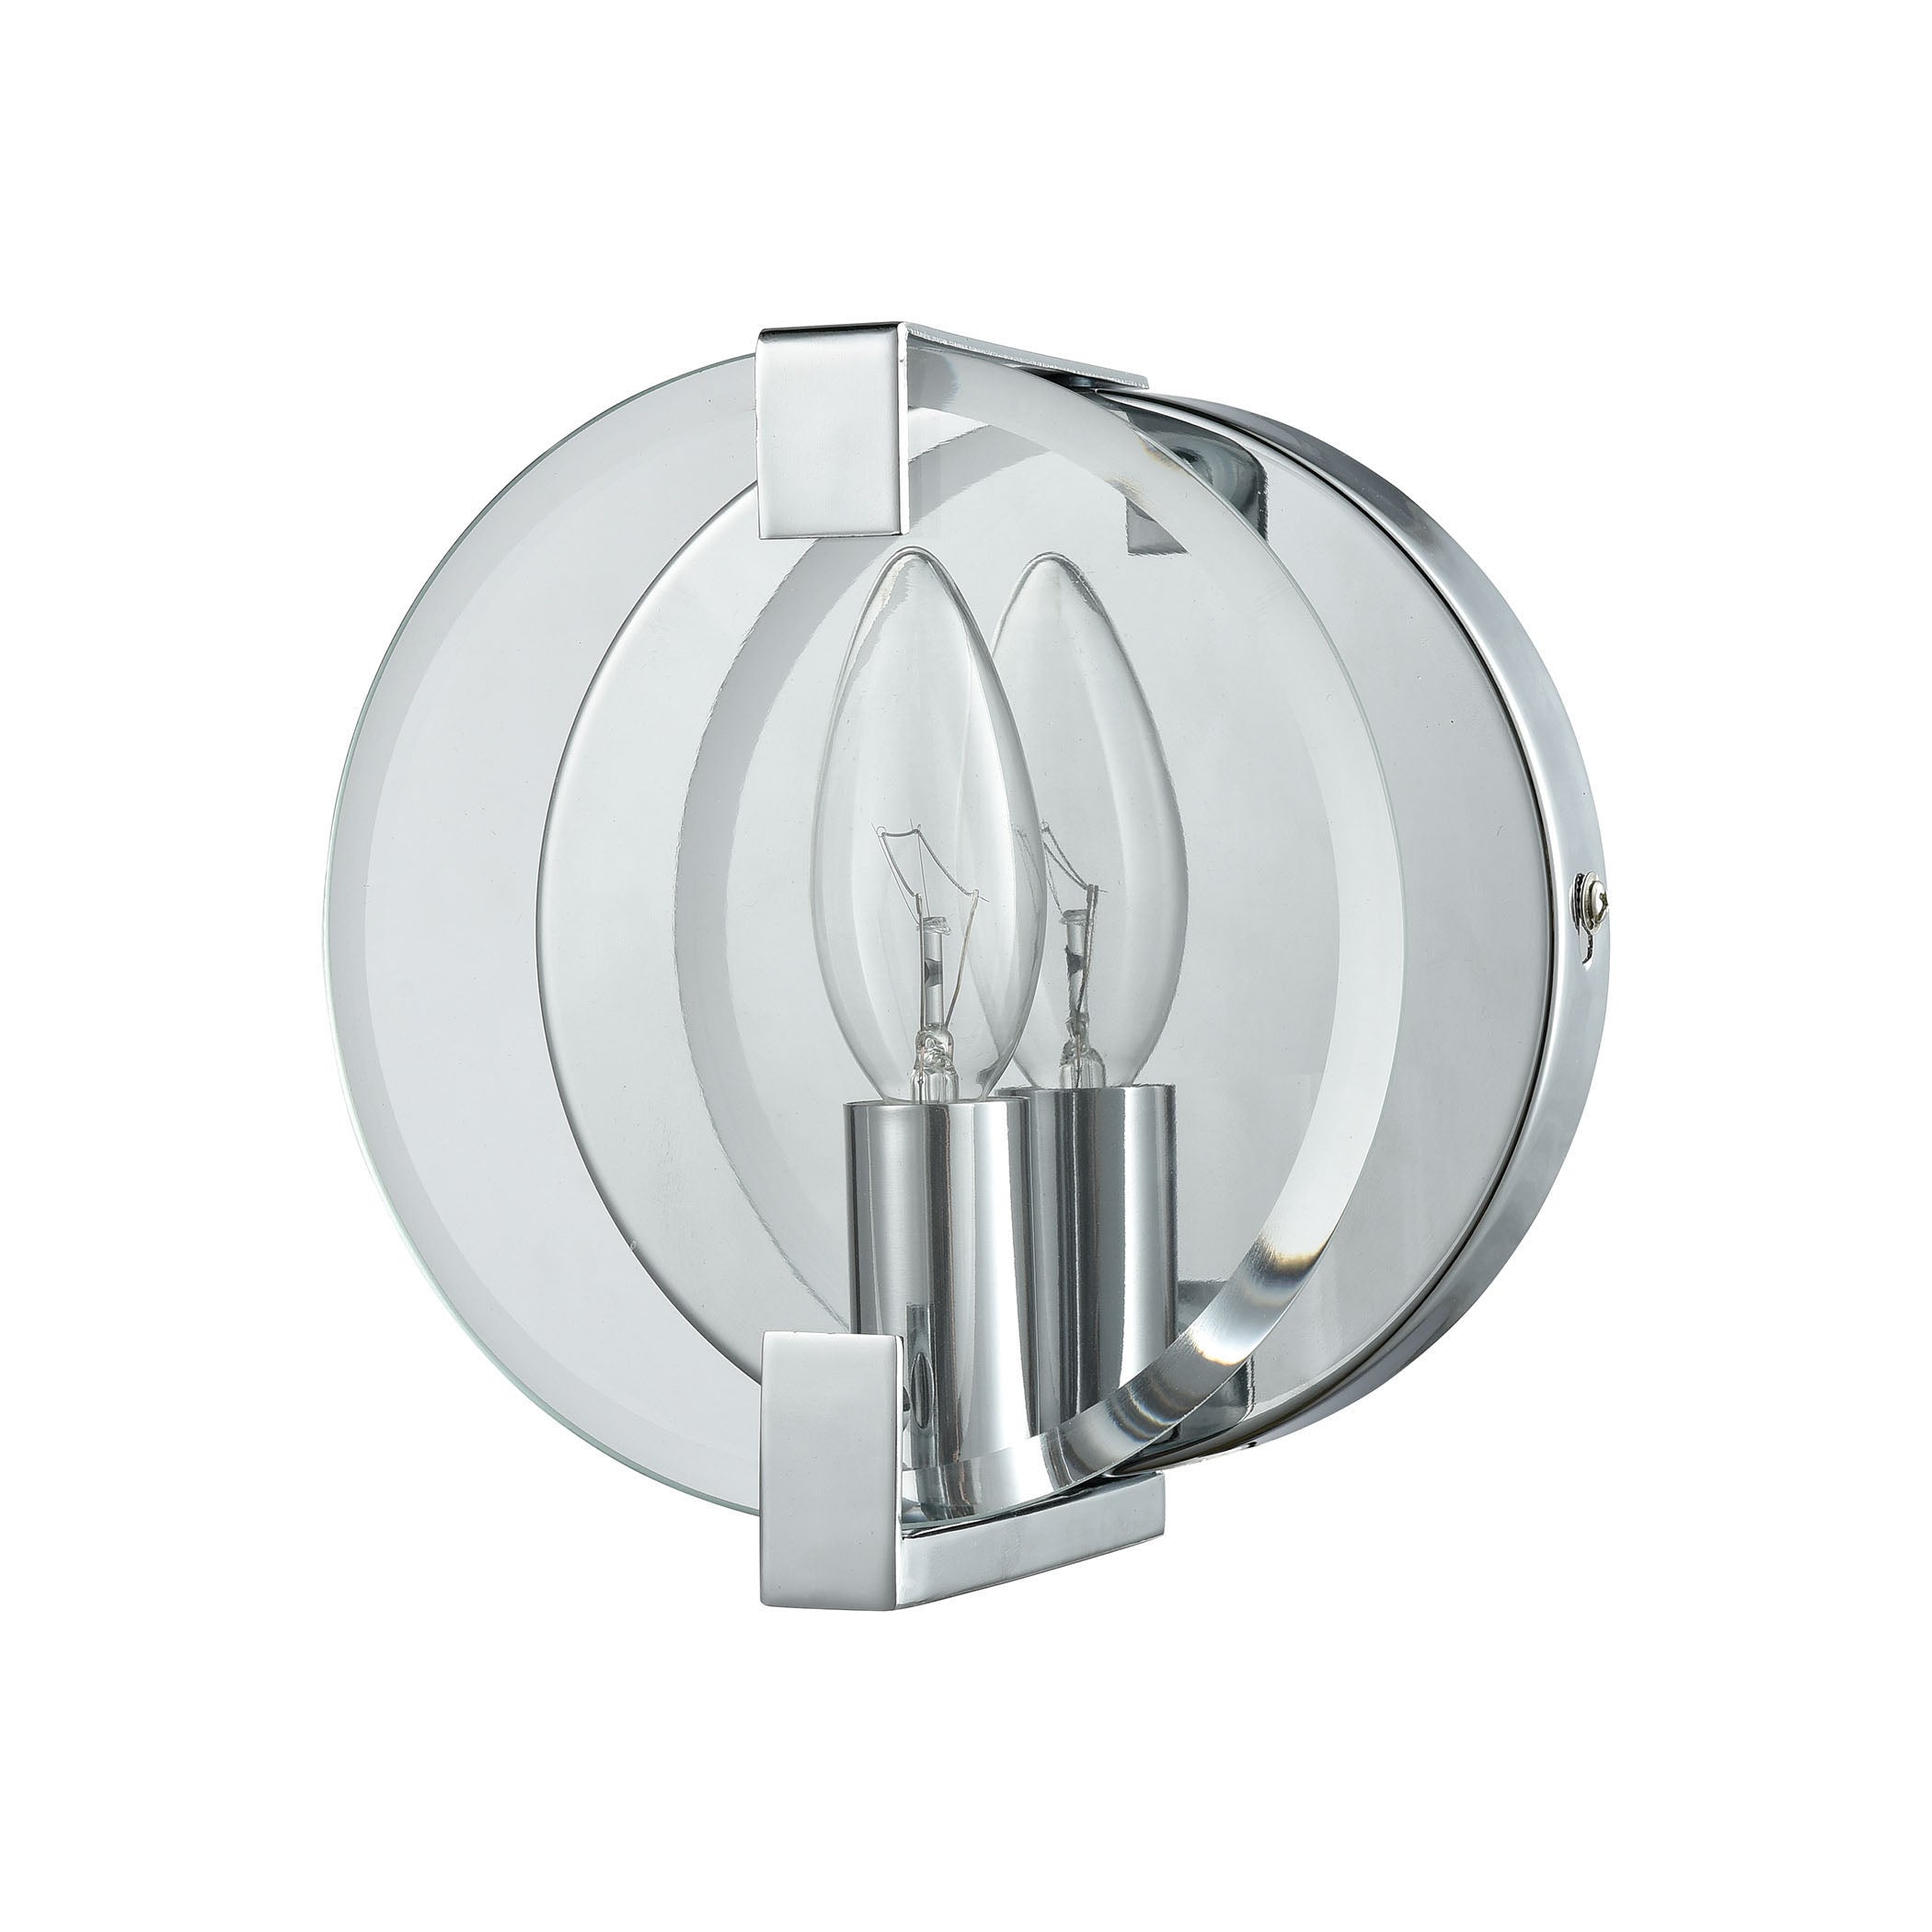 ELK Lighting 81340/1 Clasped Glass 1-Light Vanity Sconce in Polished Chrome with Clear Beveled Glass